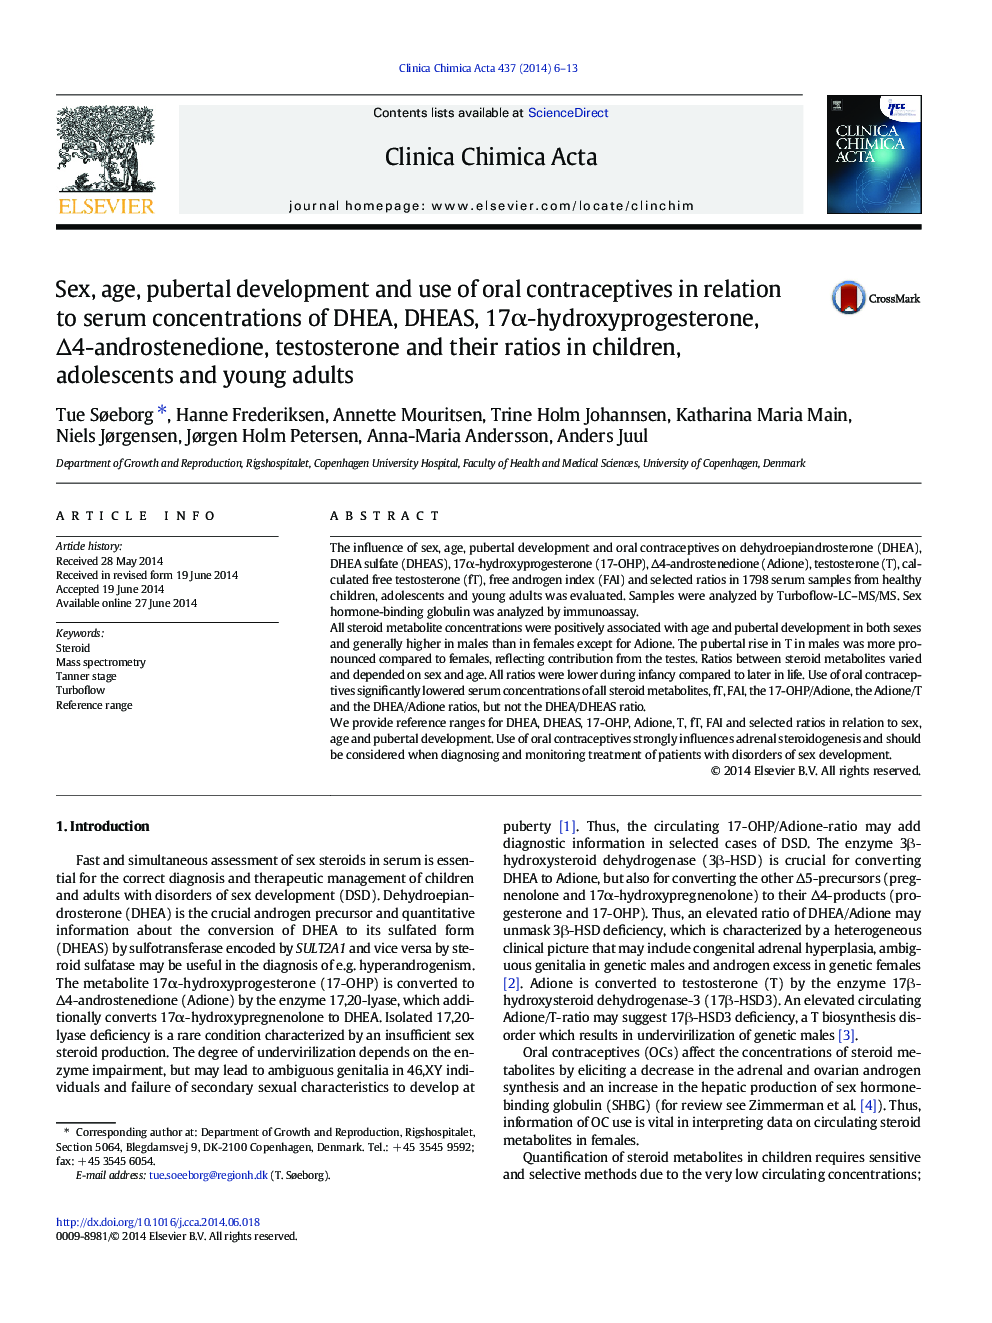 Sex, age, pubertal development and use of oral contraceptives in relation to serum concentrations of DHEA, DHEAS, 17α-hydroxyprogesterone, Δ4-androstenedione, testosterone and their ratios in children, adolescents and young adults